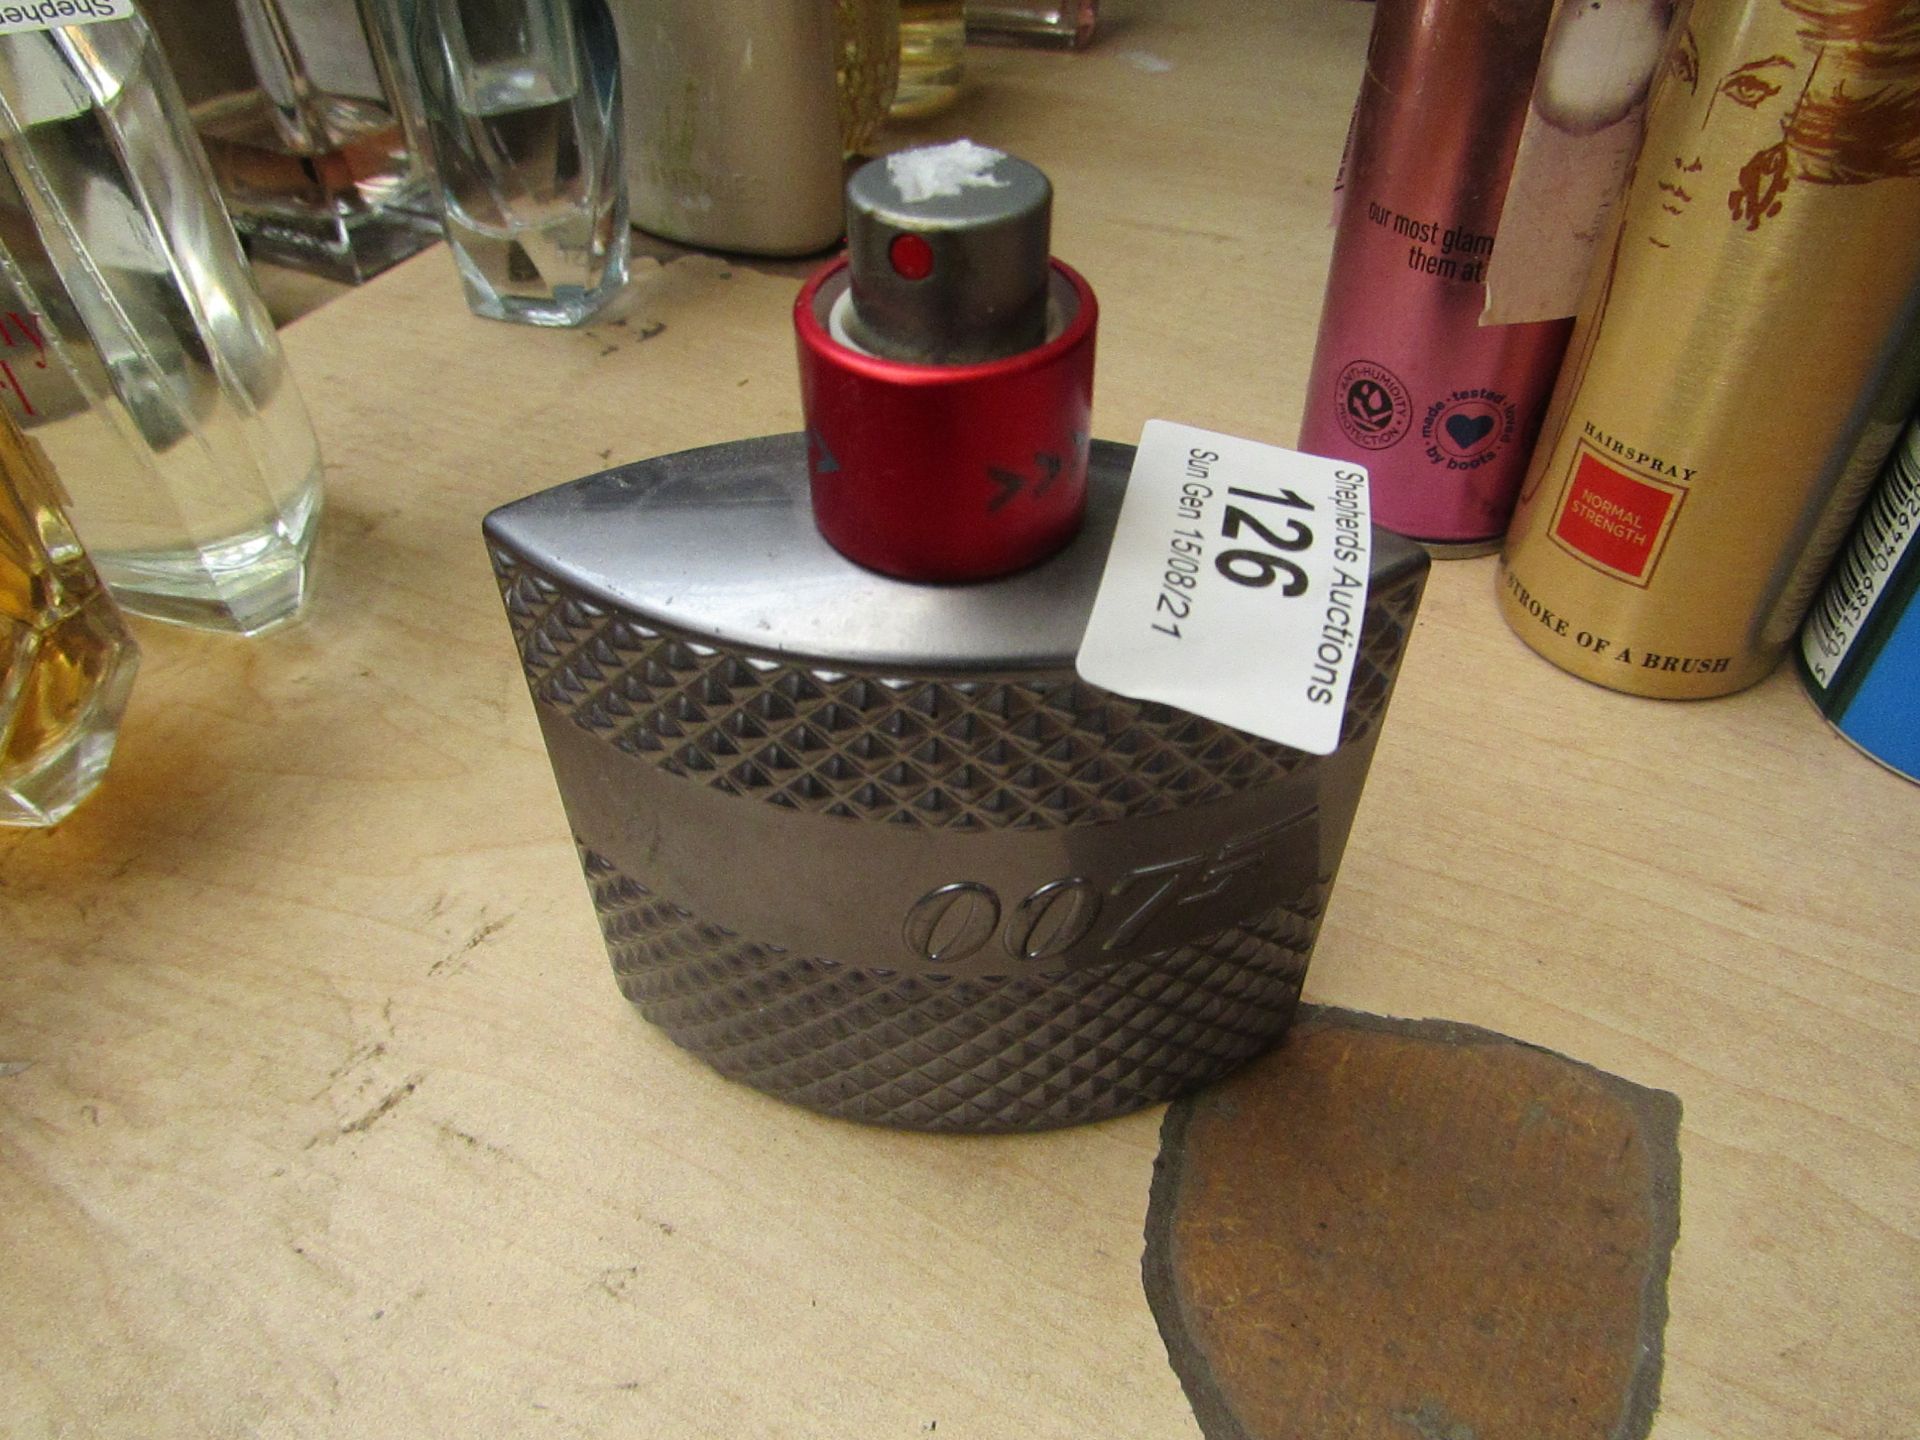 007 aftershave - 75ml - 70% full